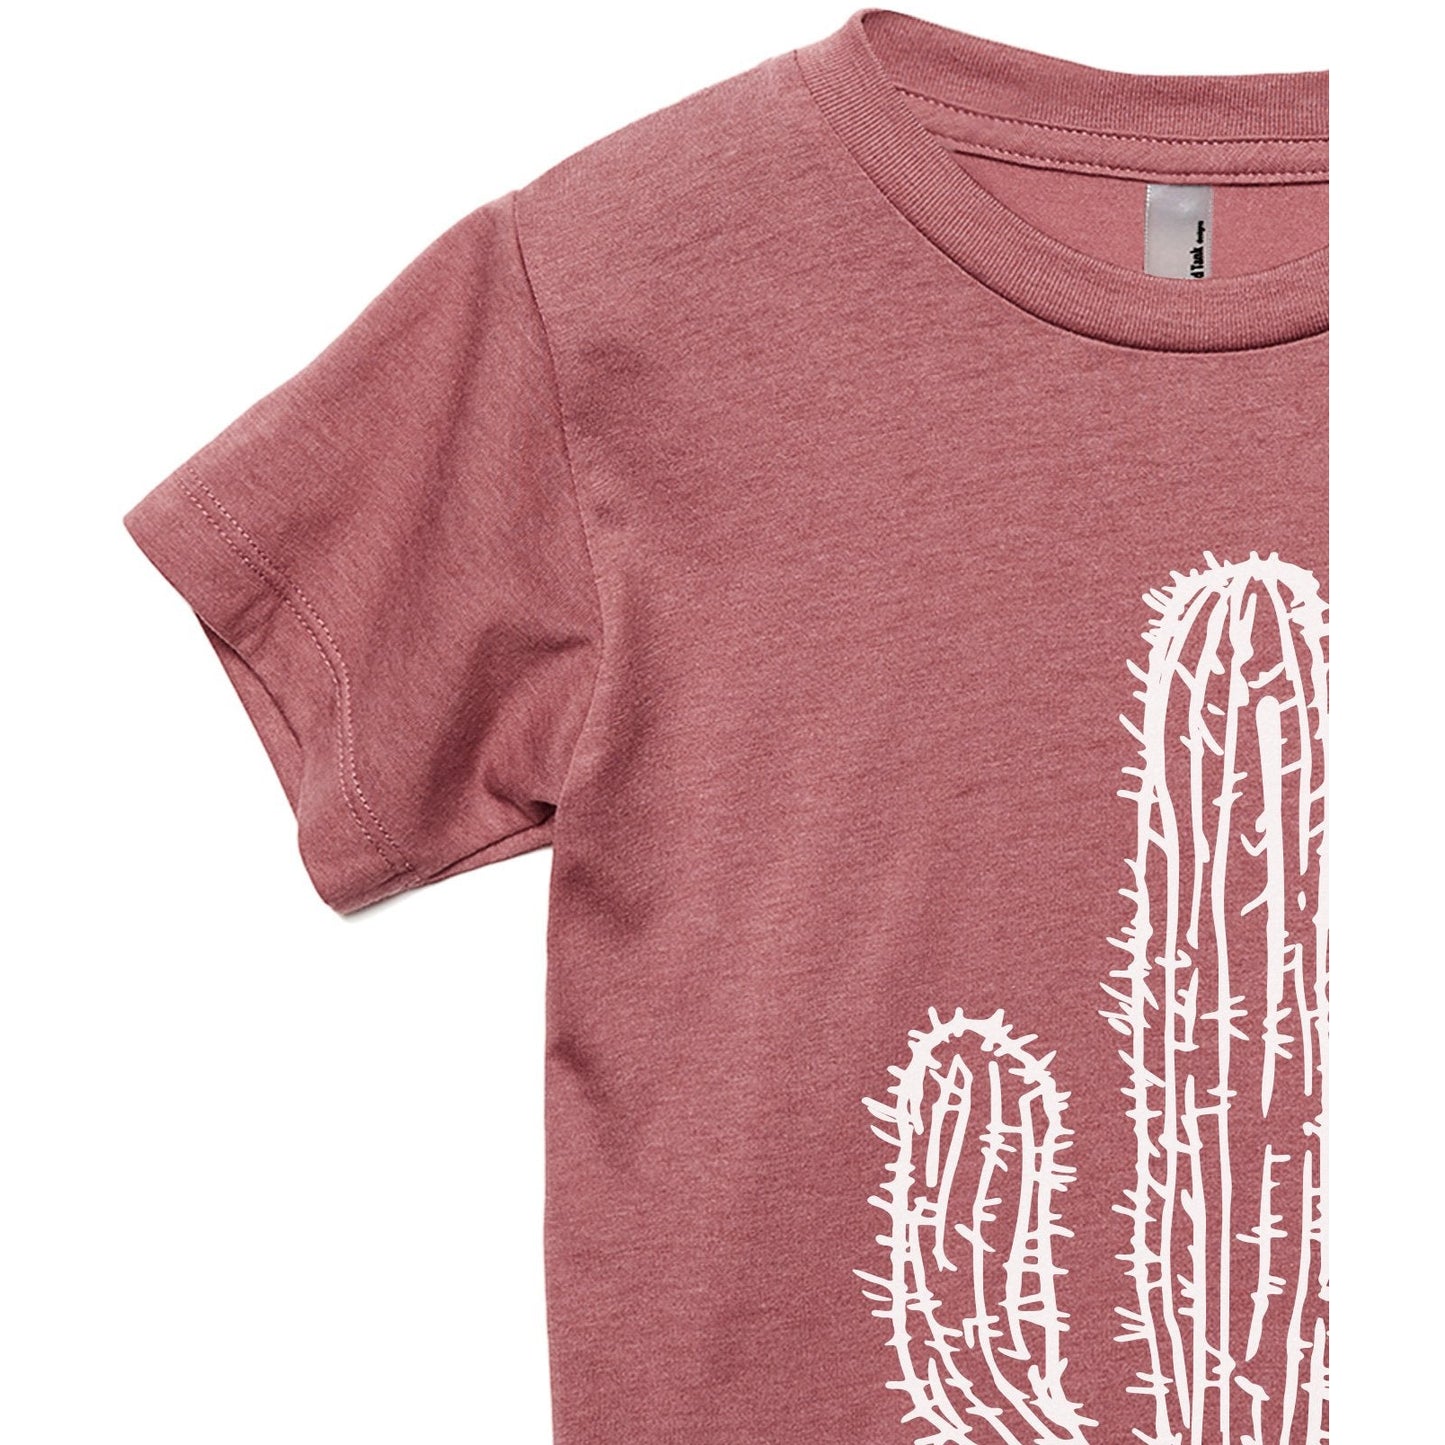 Desert Cactus Toddler's Go-To Crewneck Tee Heather Rouge Zoom Details A